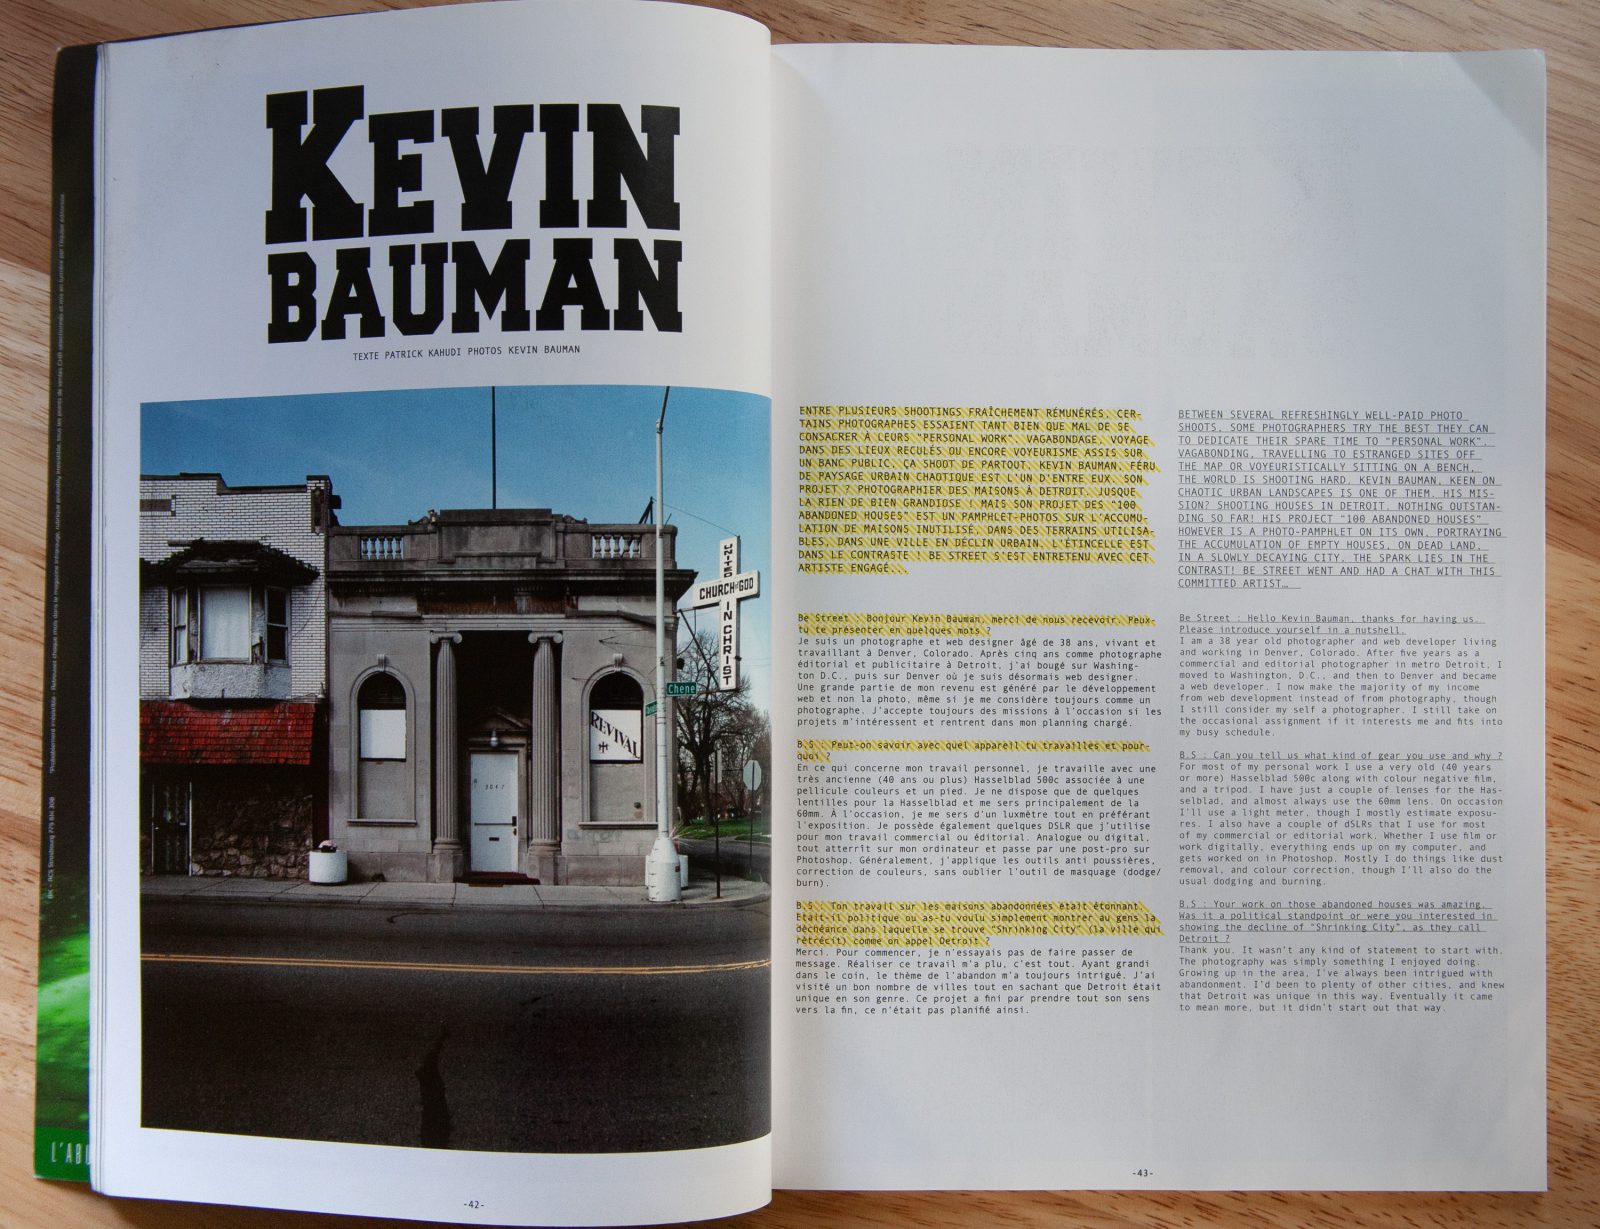 Be Street magazine. Interview and photography.